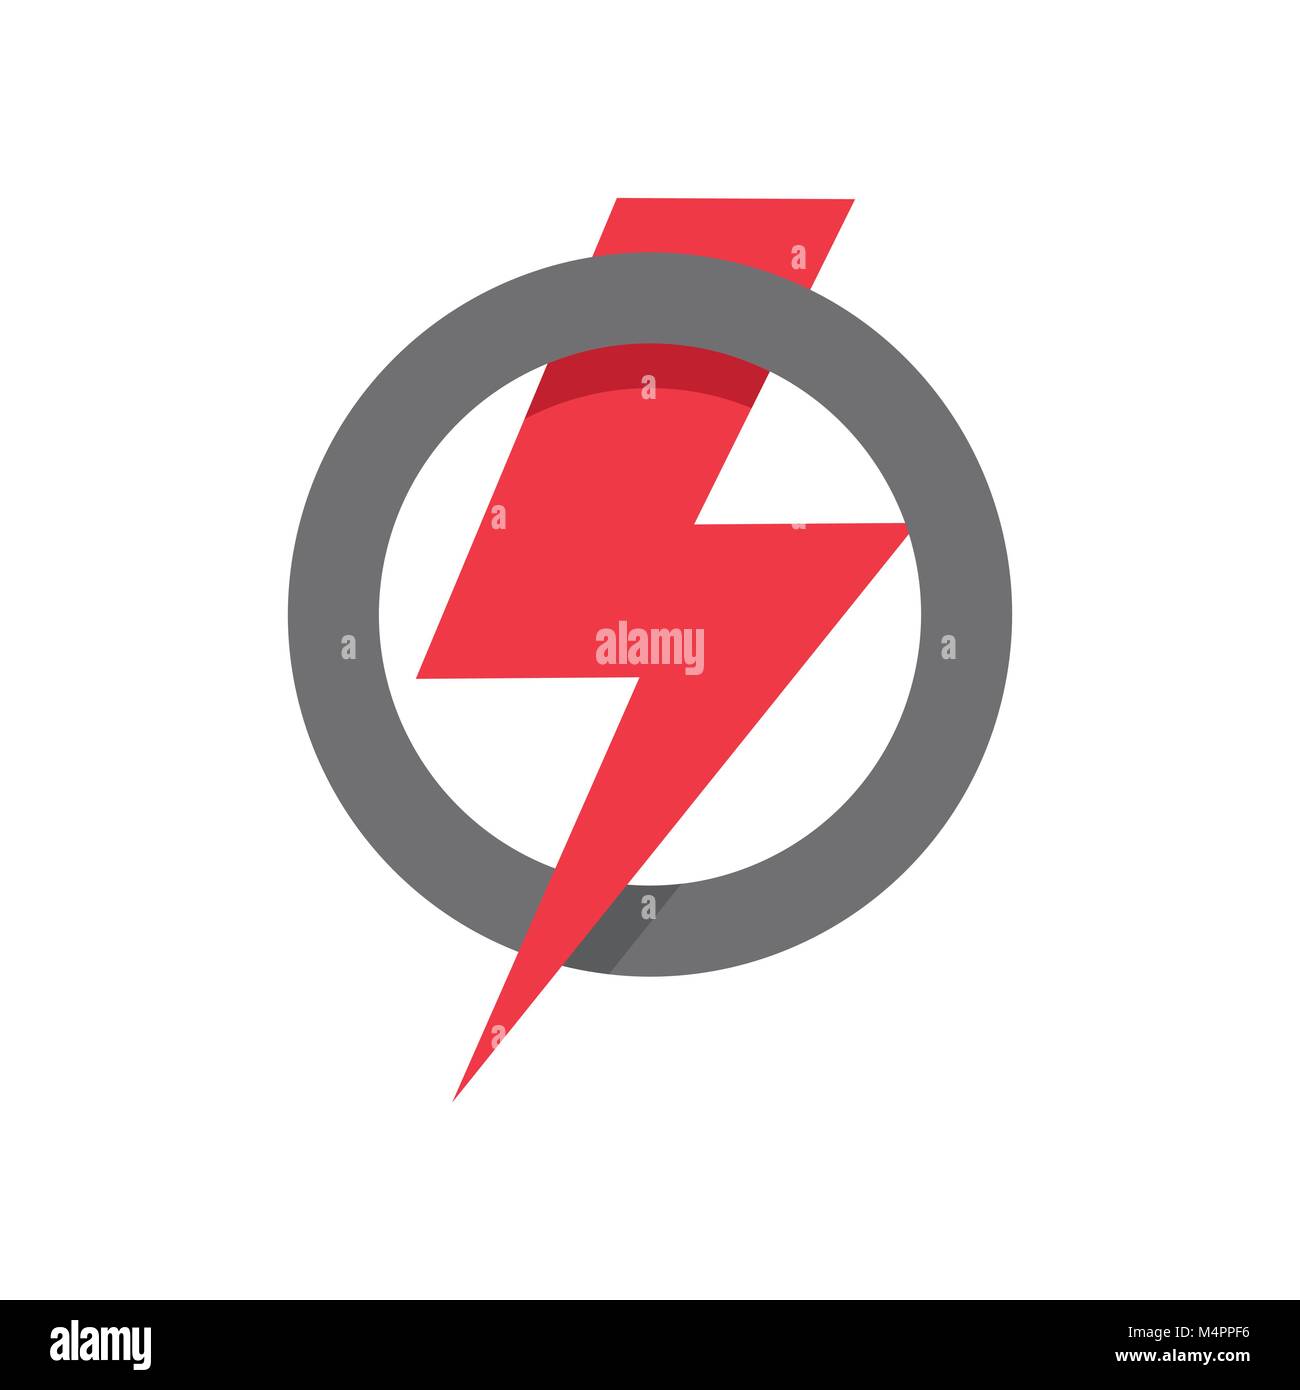 Red lightning icon in circle shape, power, strength, win symbol on white background. Stock Vector